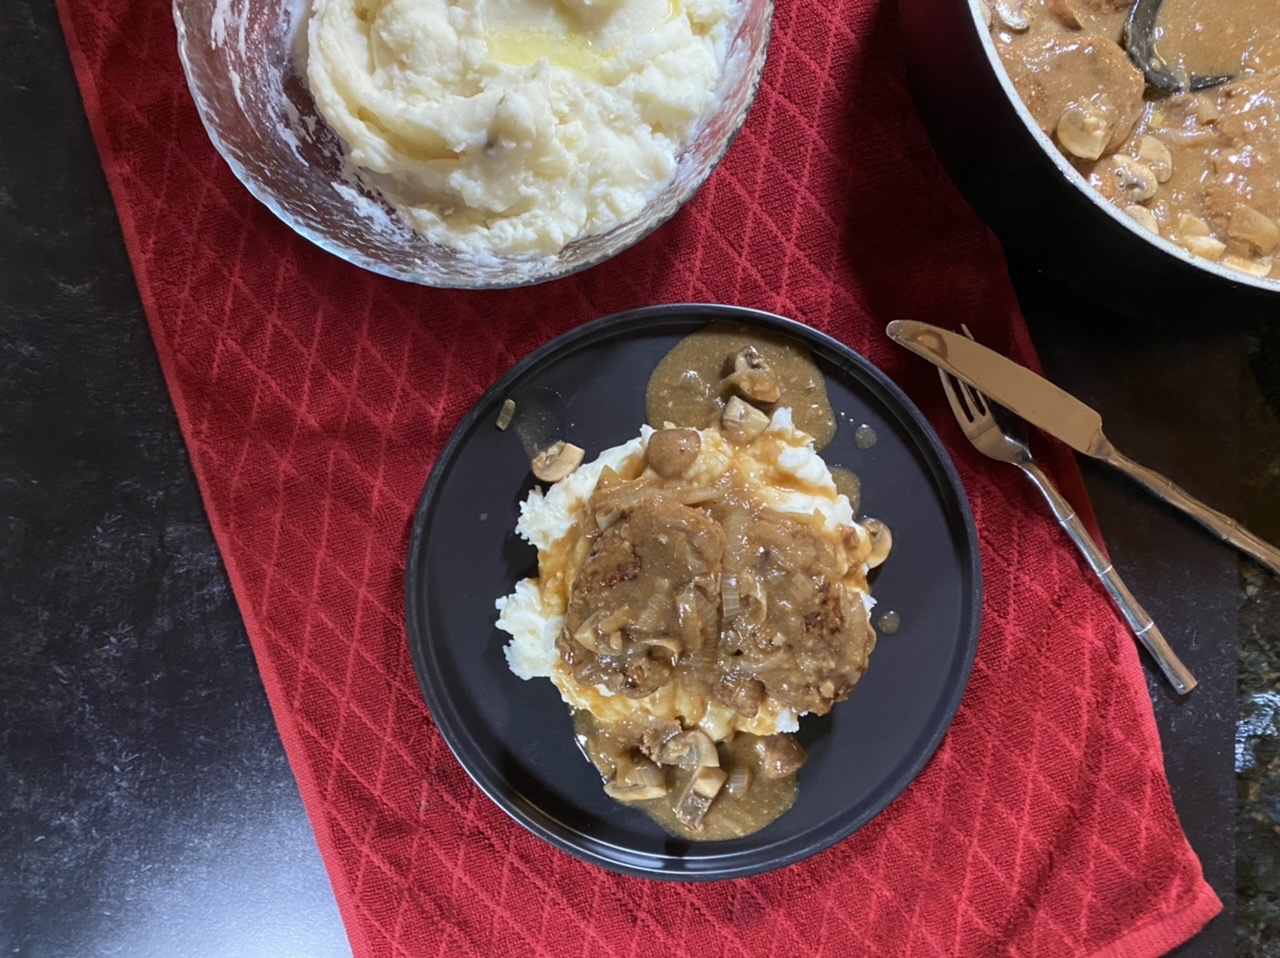 Salisbury steak and gravy over mashed potatoes on a black plate on top of a red towel with a bowl of mashed potatoes and a sauce pan